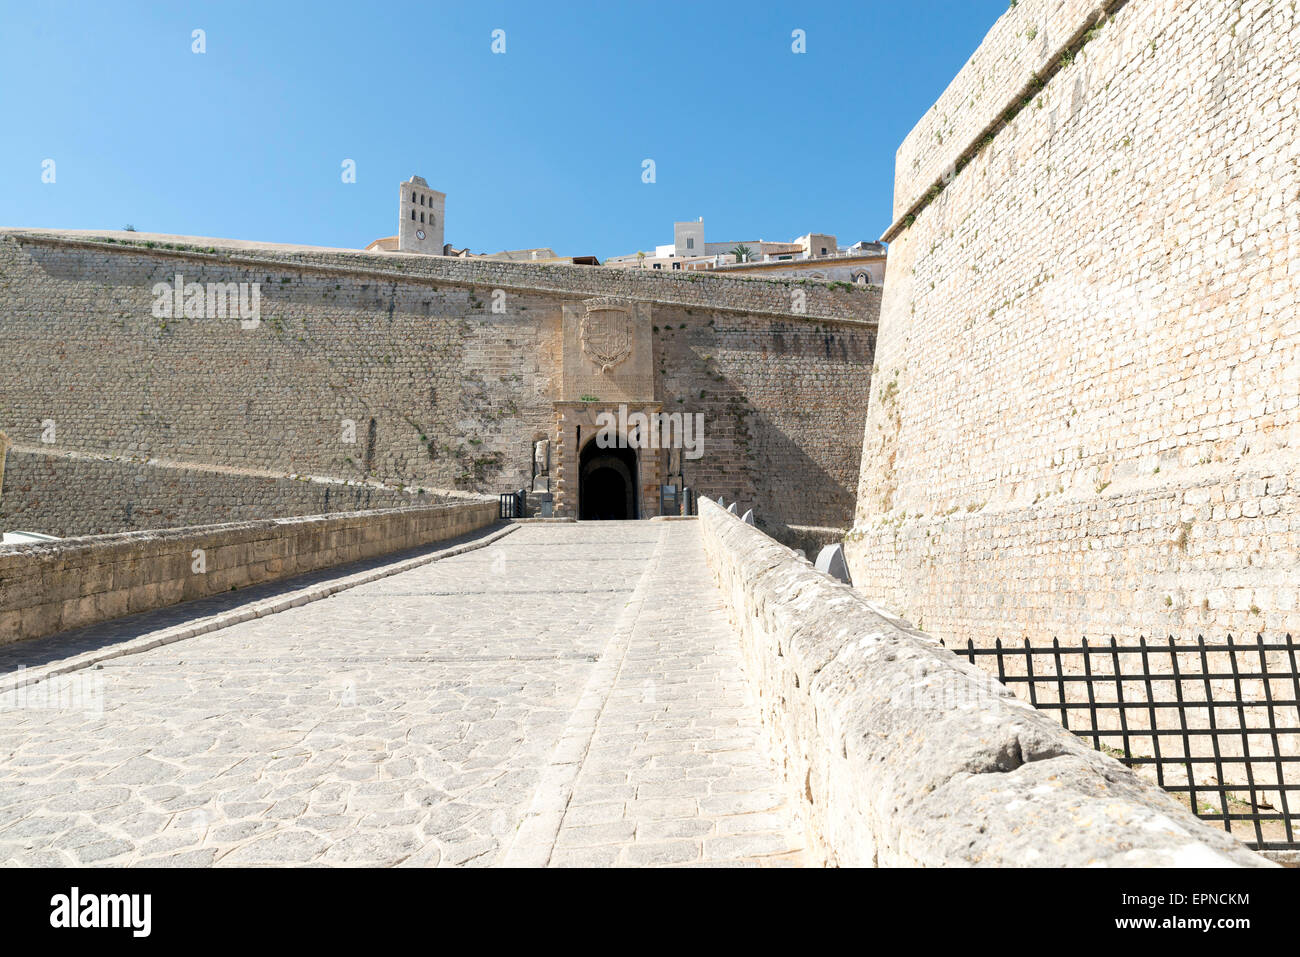 Old town walls and gateway to the old town part of Ibiza Town, on the island of Ibiza. Stock Photo